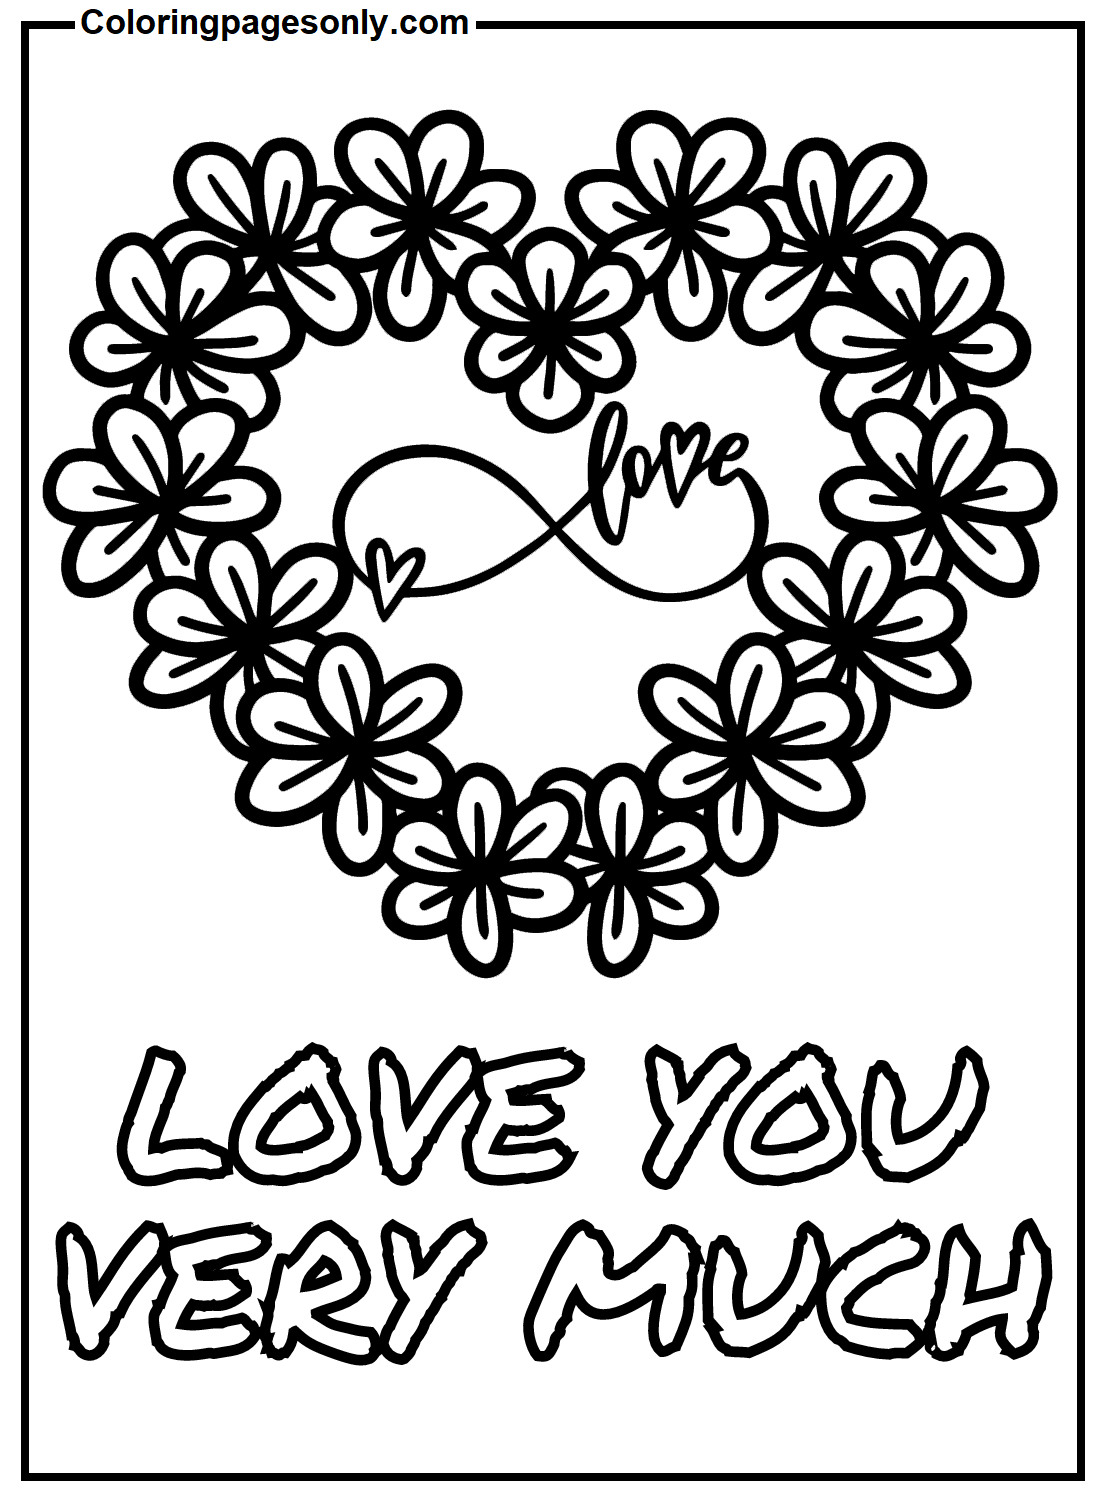 Love You Very Much Coloring Pages